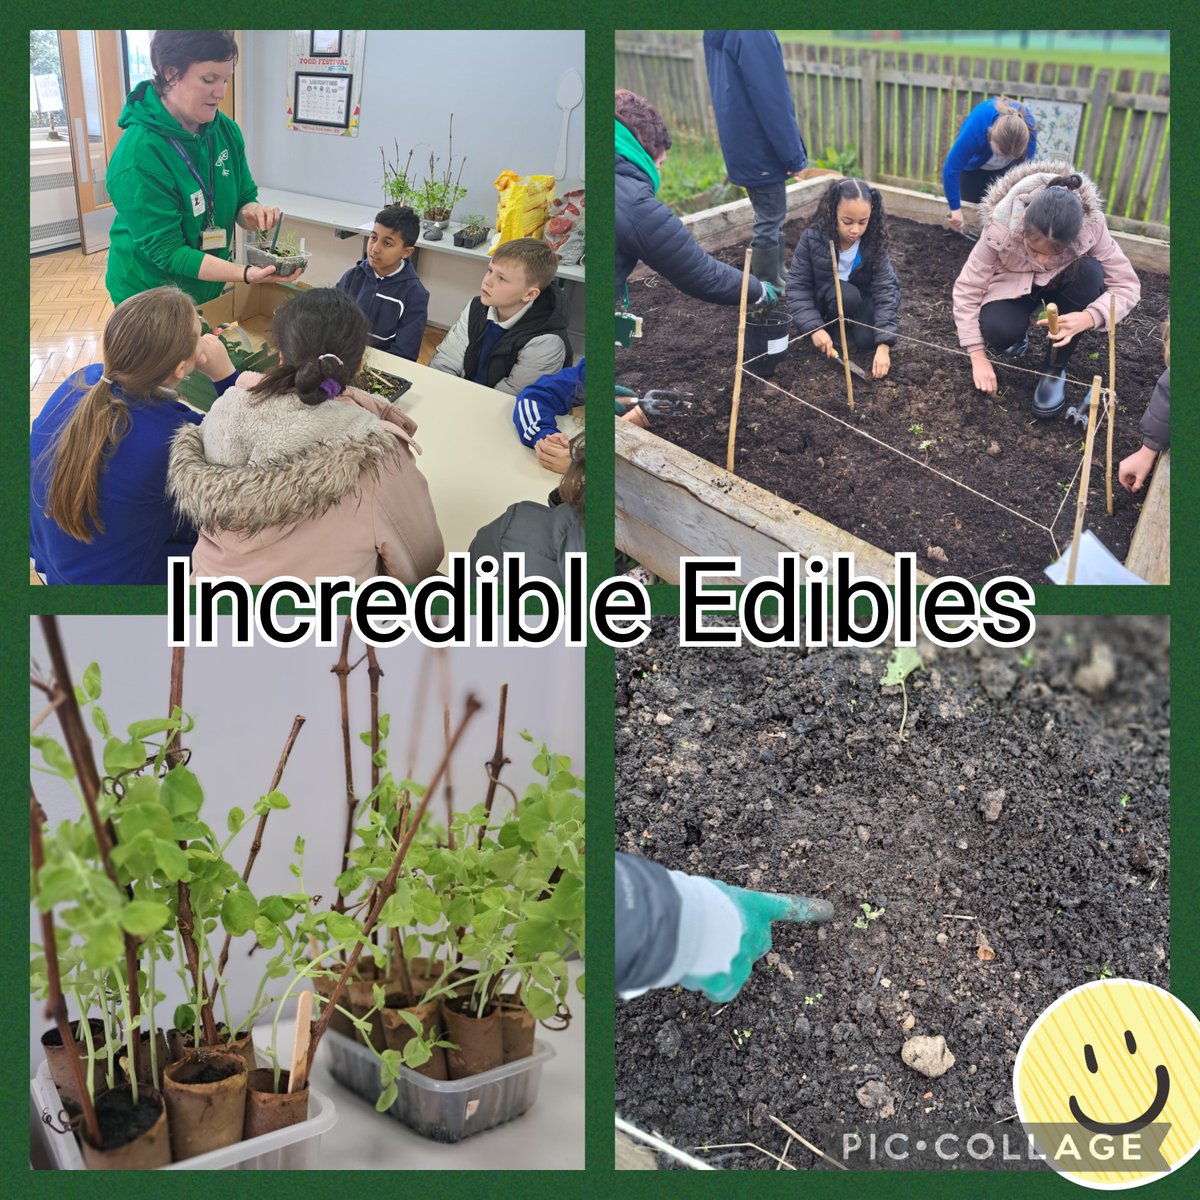 We've been working alongside Incredible Edible to implement some of the brilliant aims from @LSChildrenMayor manifesto! We have been composting and growing with aim to make school more sustainable!